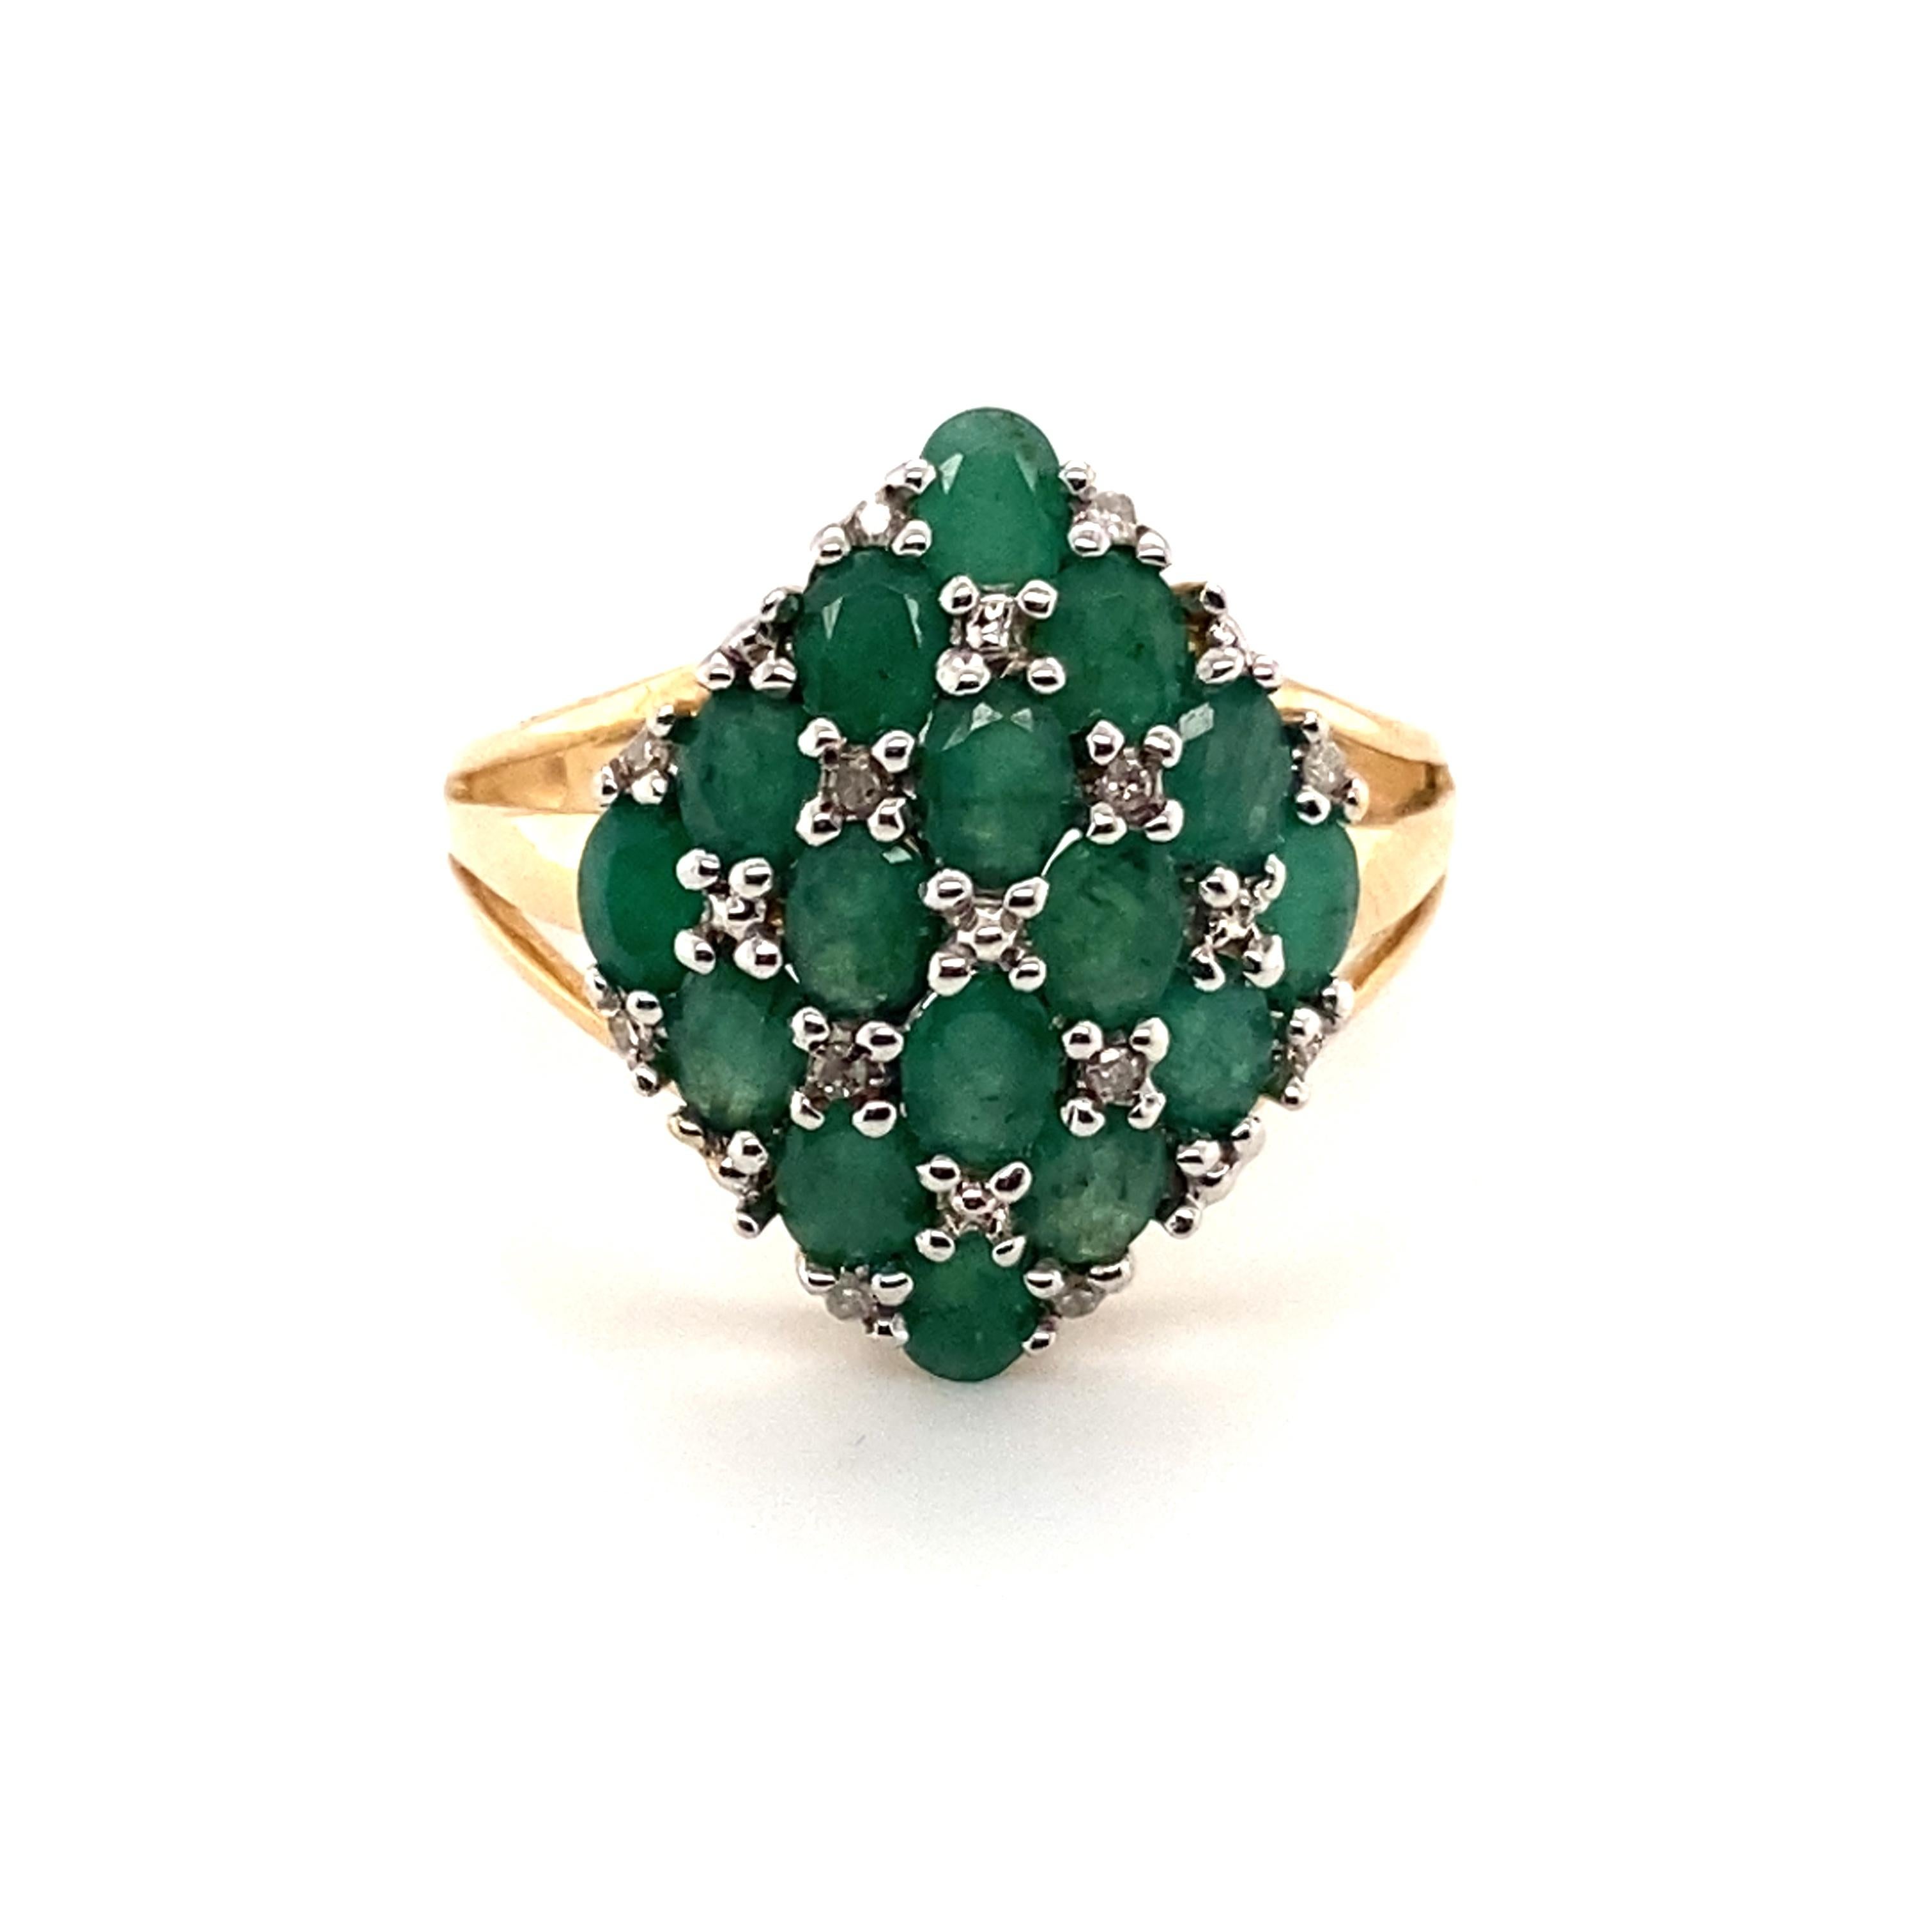 1.92 Carat Emerald and Diamond Ring in 14 Karat Yellow Gold For Sale 1